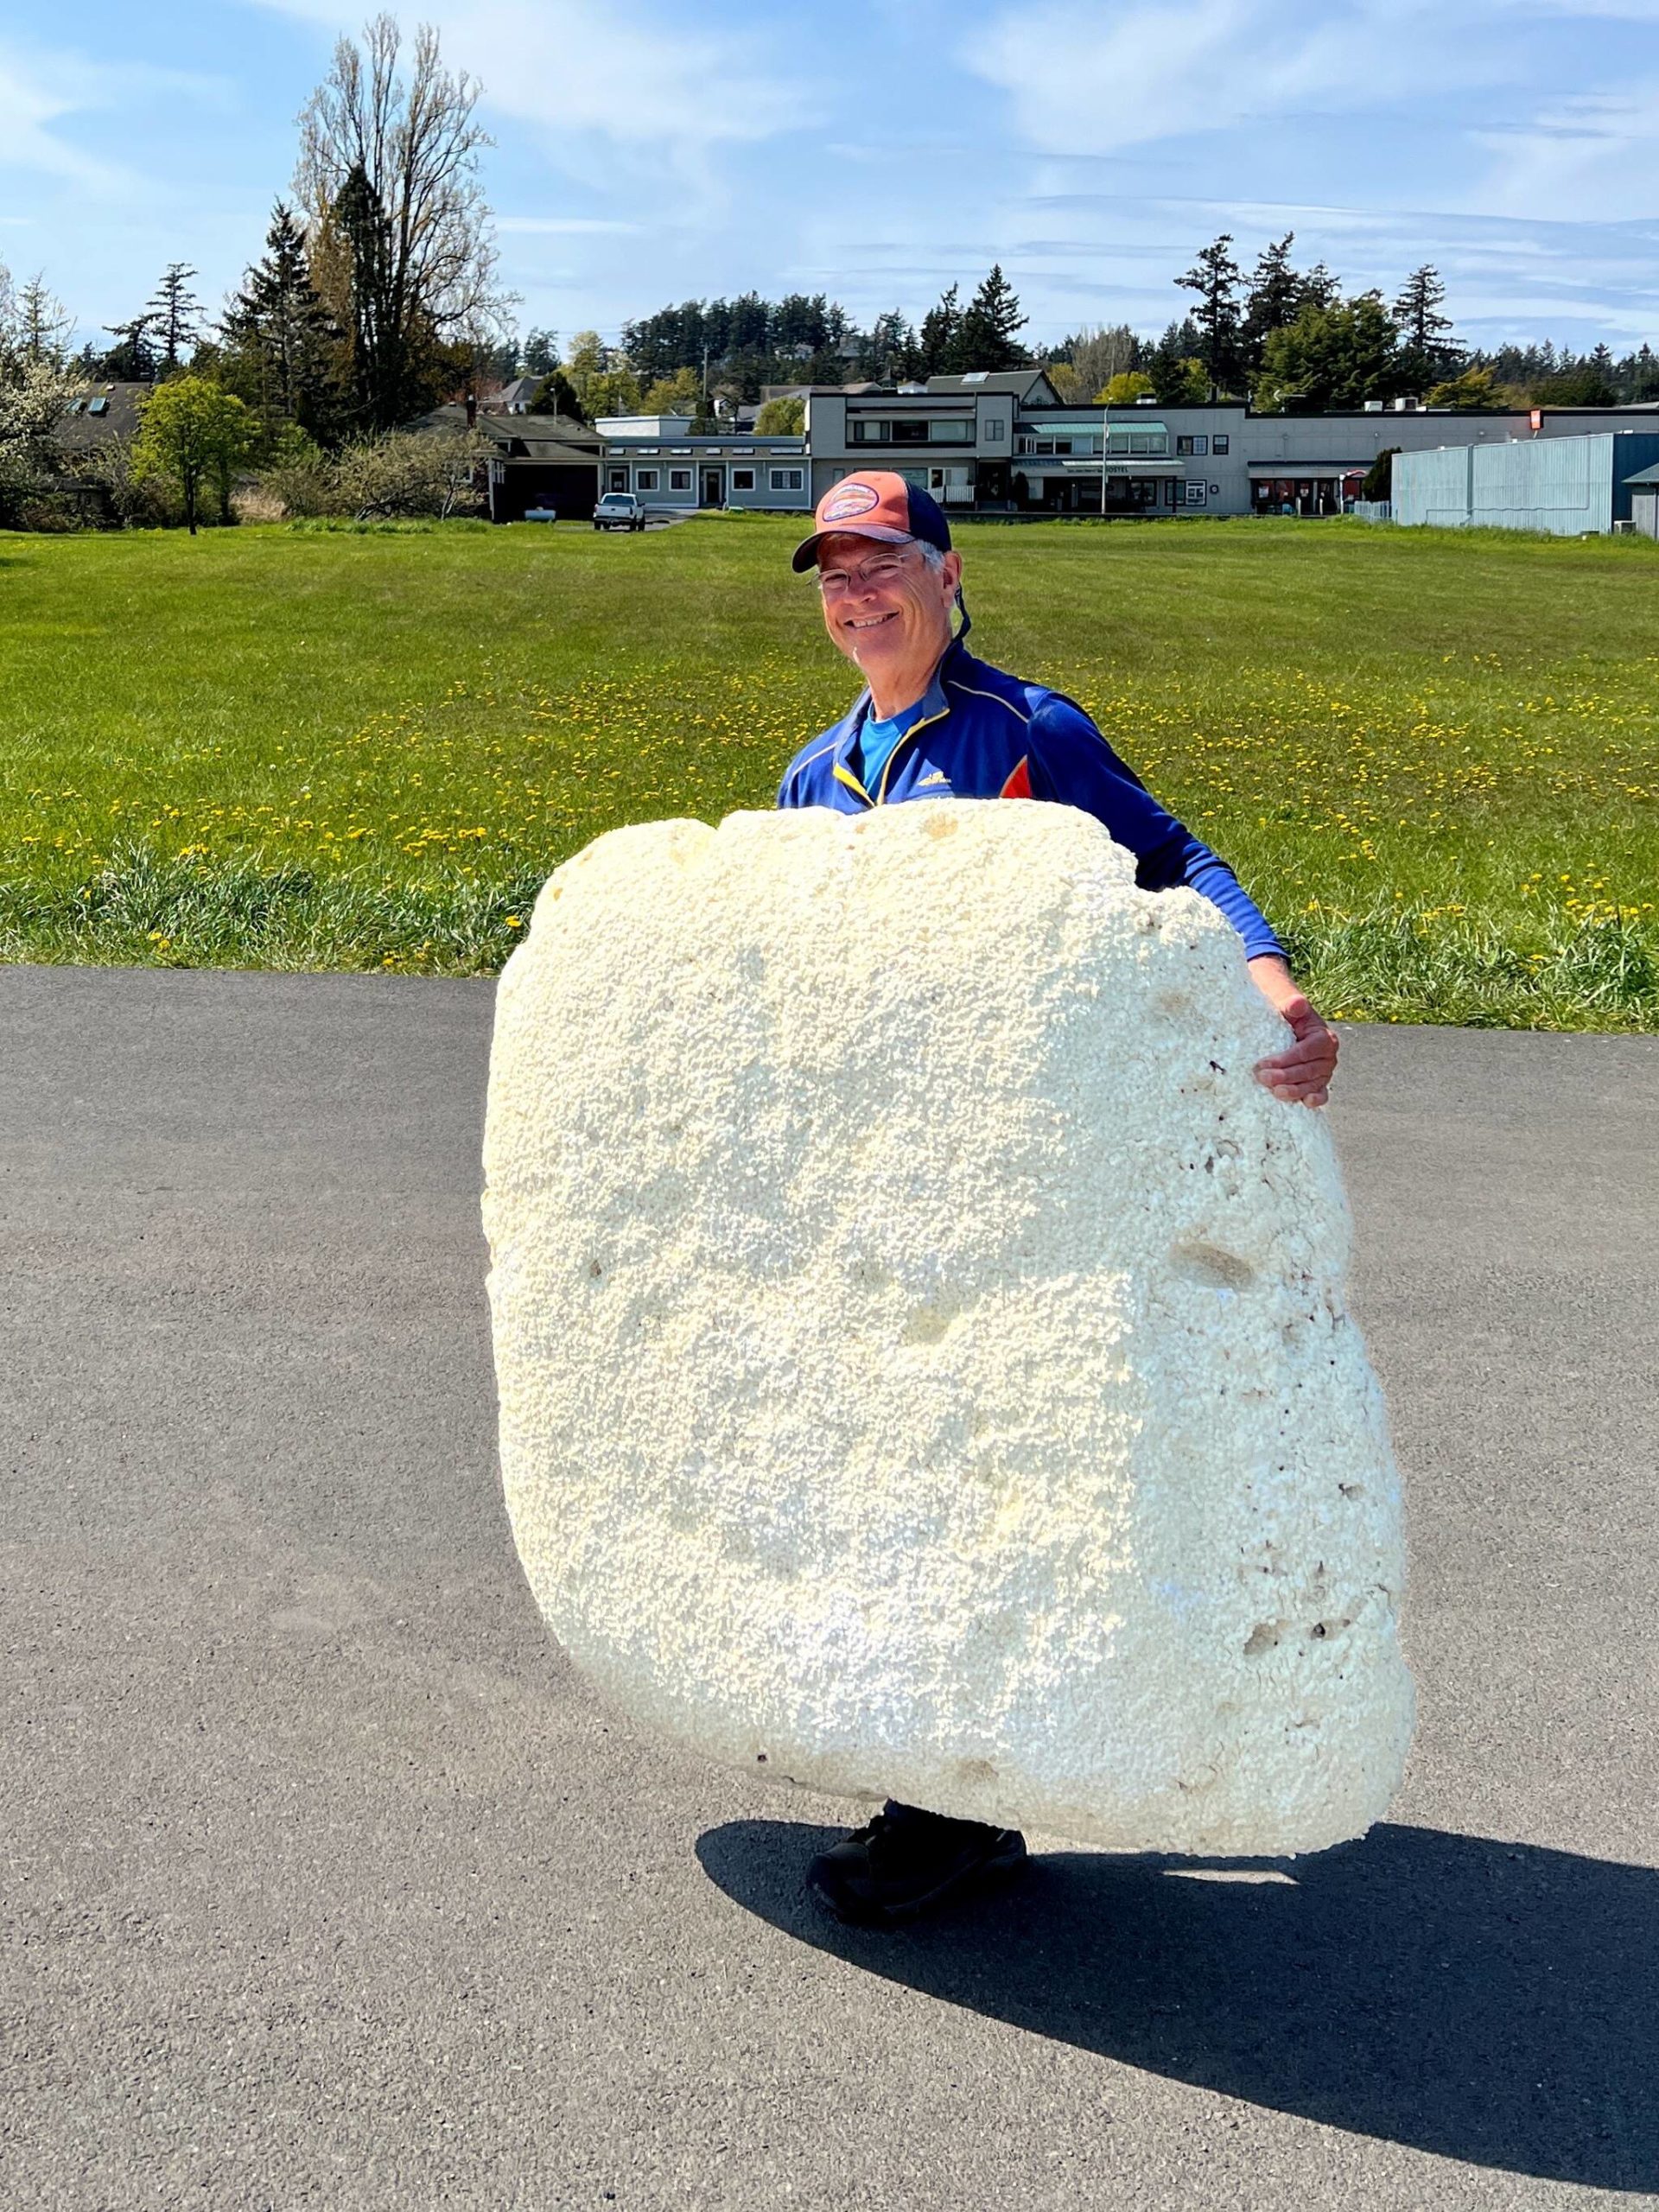 Contributed photo
Jim McNairy from San Juan Island carries a large piece of Styrofoam he collected from Jakle’s Lagoon.